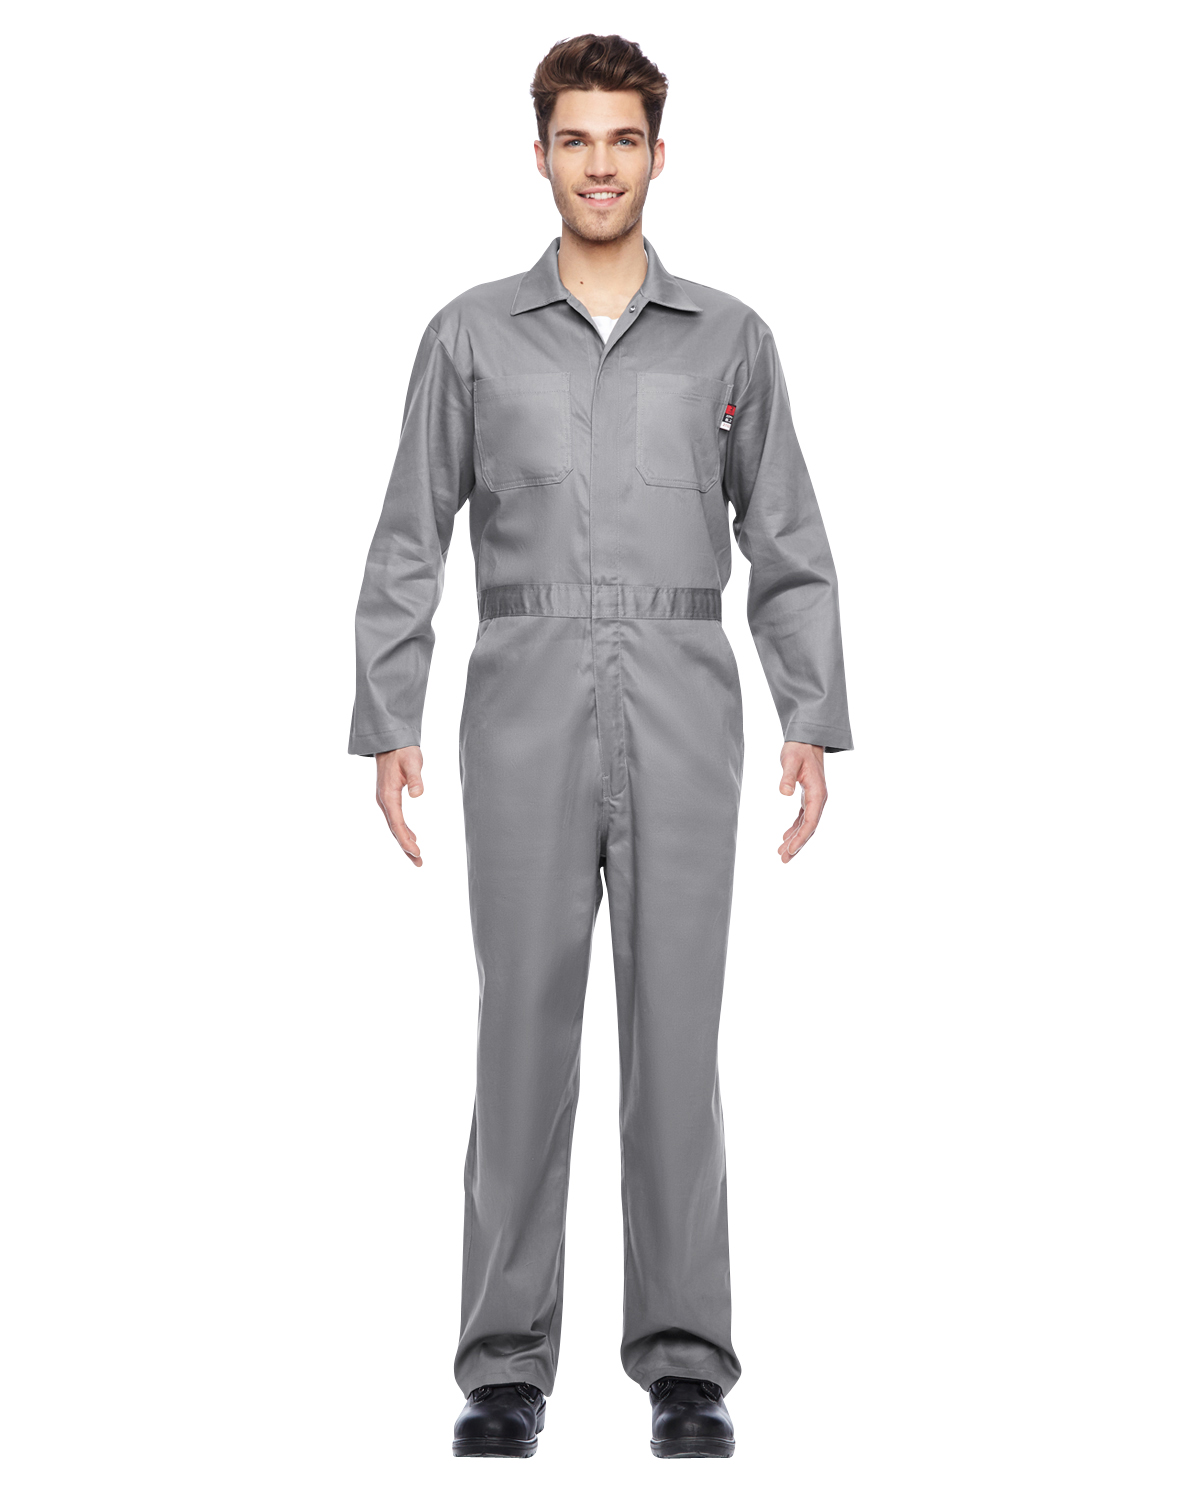 Unisex Flame-Resistant Contractor Coverall 2.0 - Tall